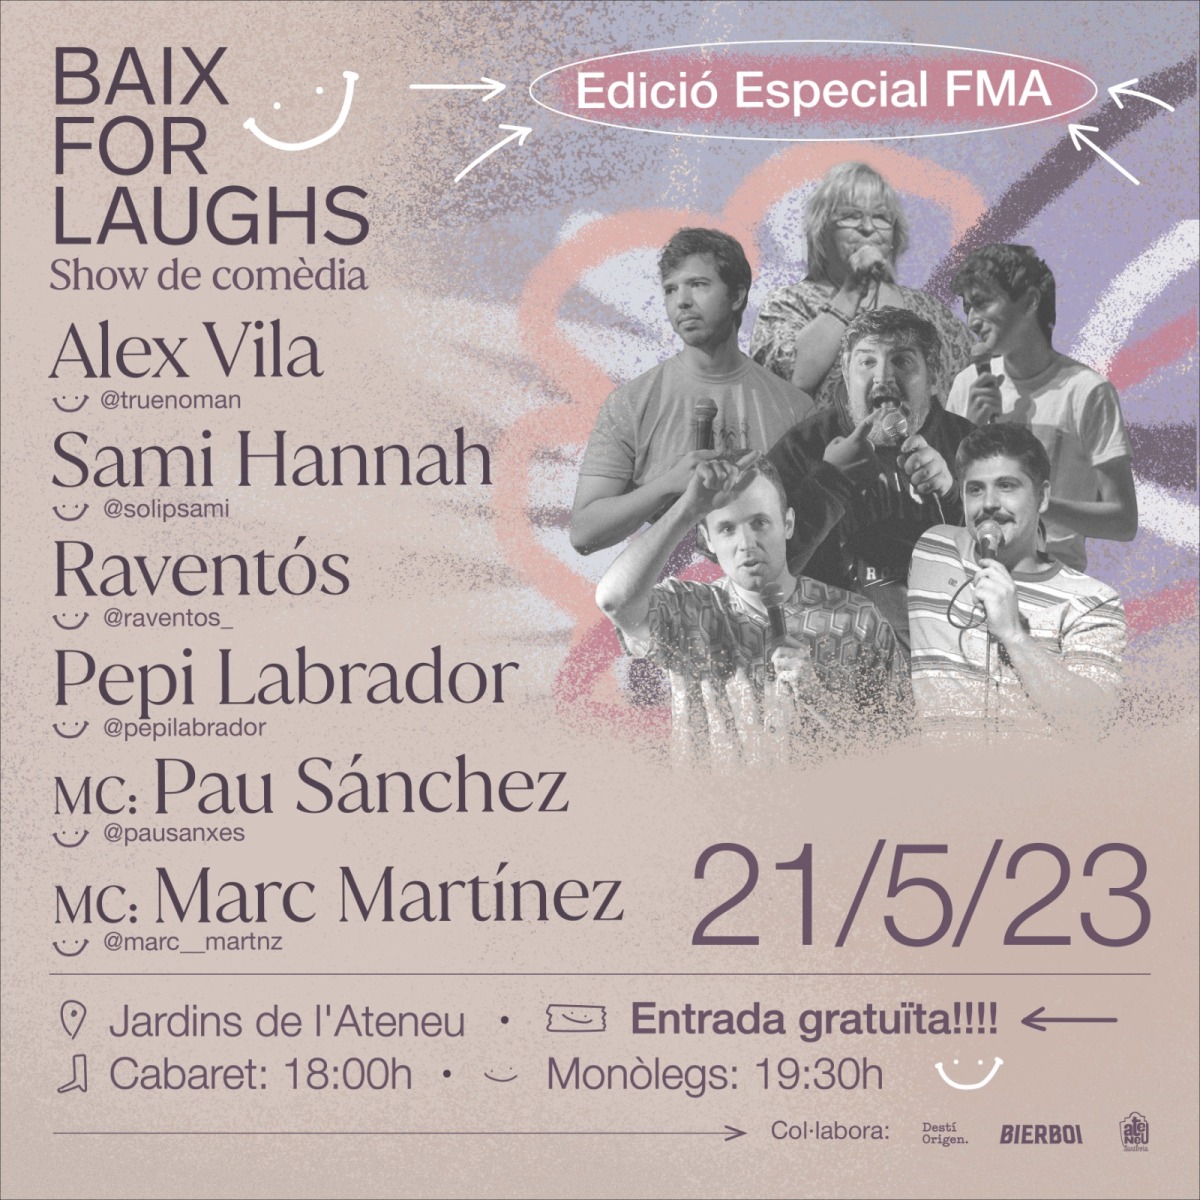 BAIX FOR LAUGHS